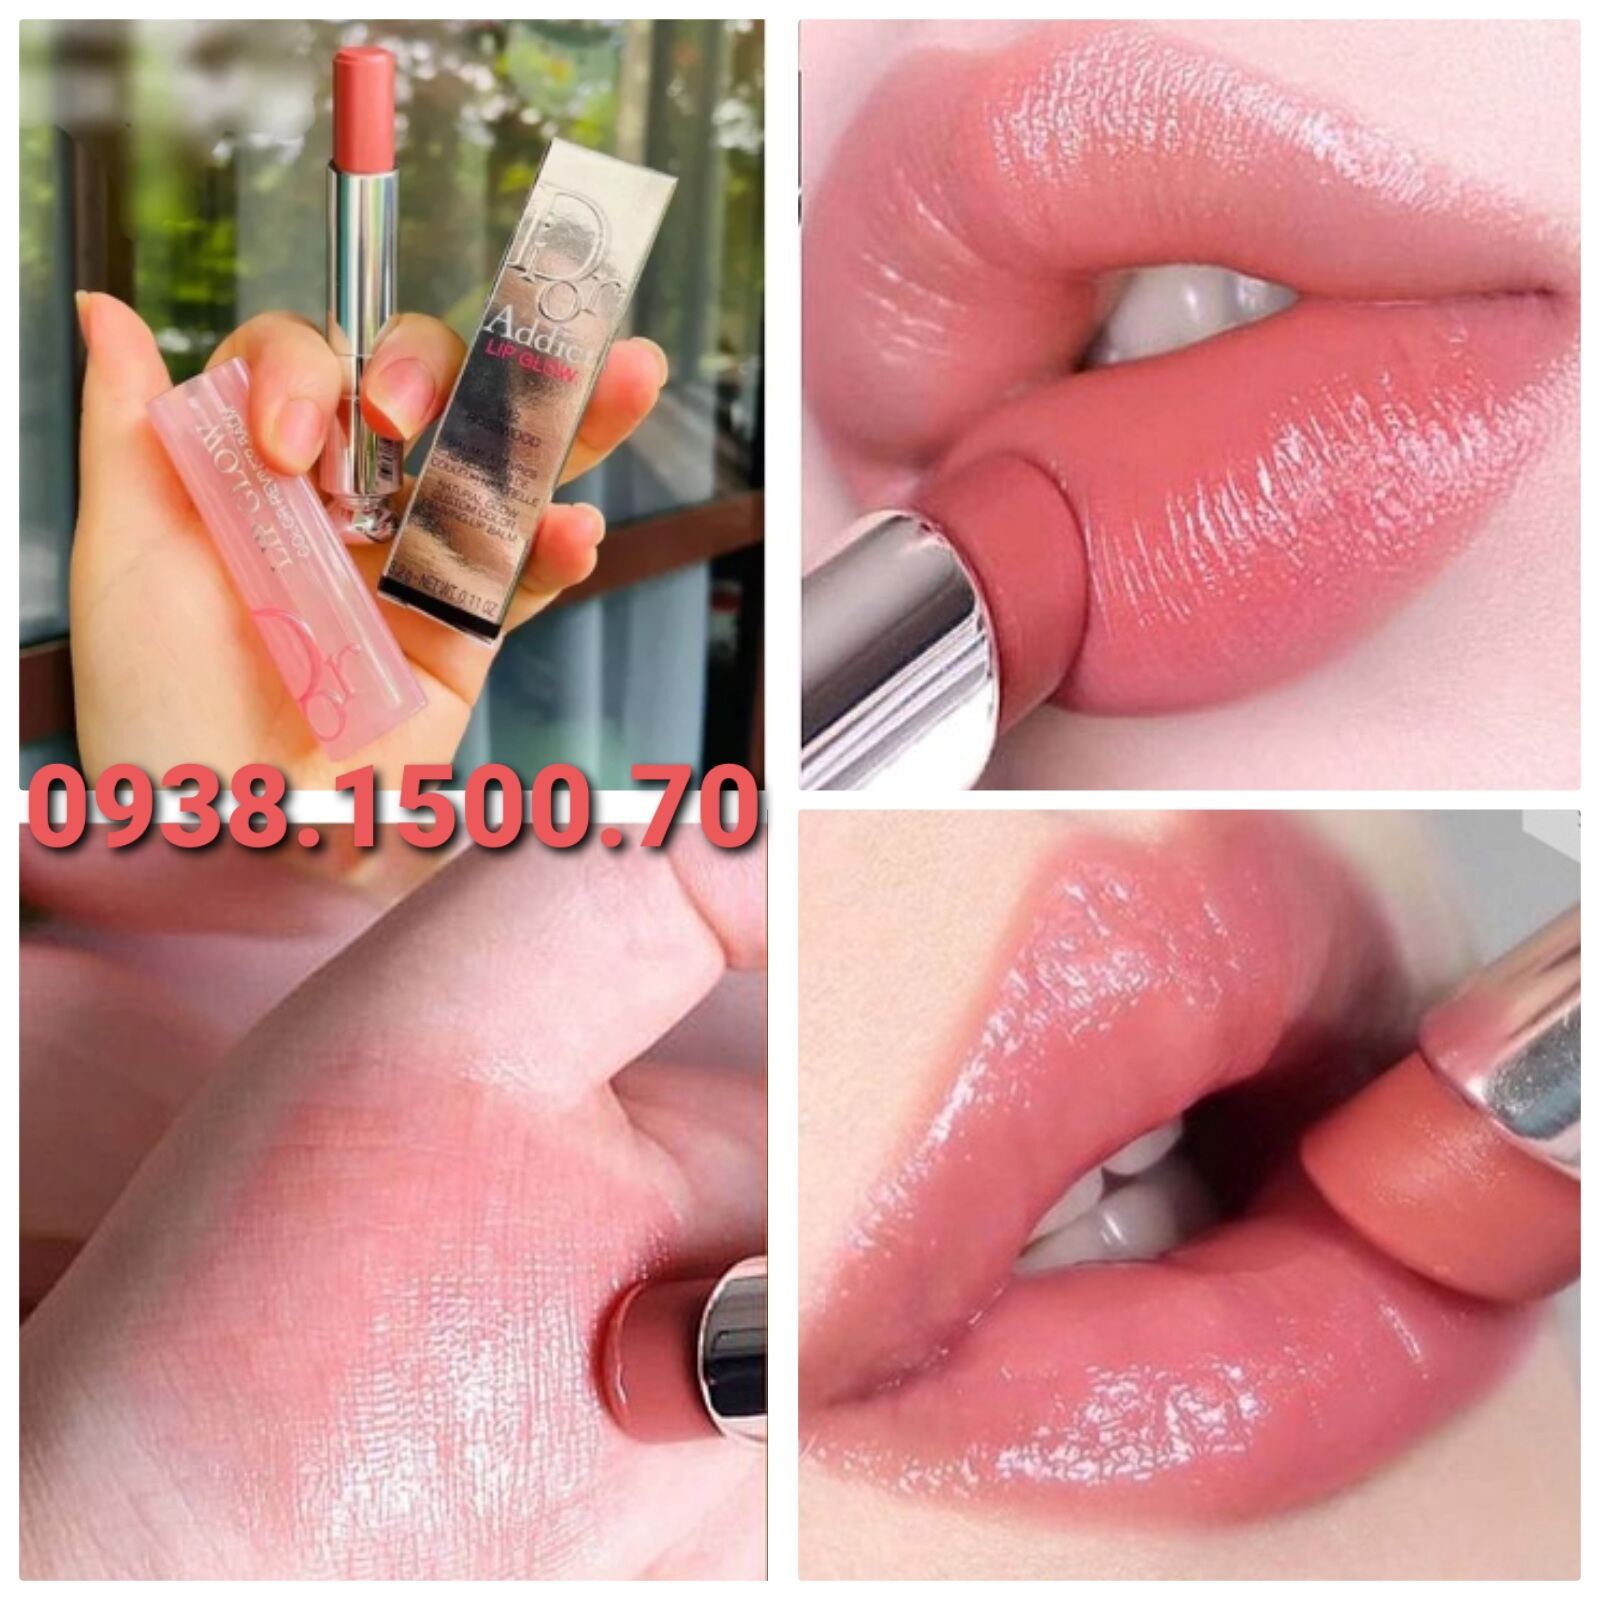 Dior Addict Lip Glow Color Reviver Lip Balms in Pink Coral and Lilac  The  Beauty Look Book